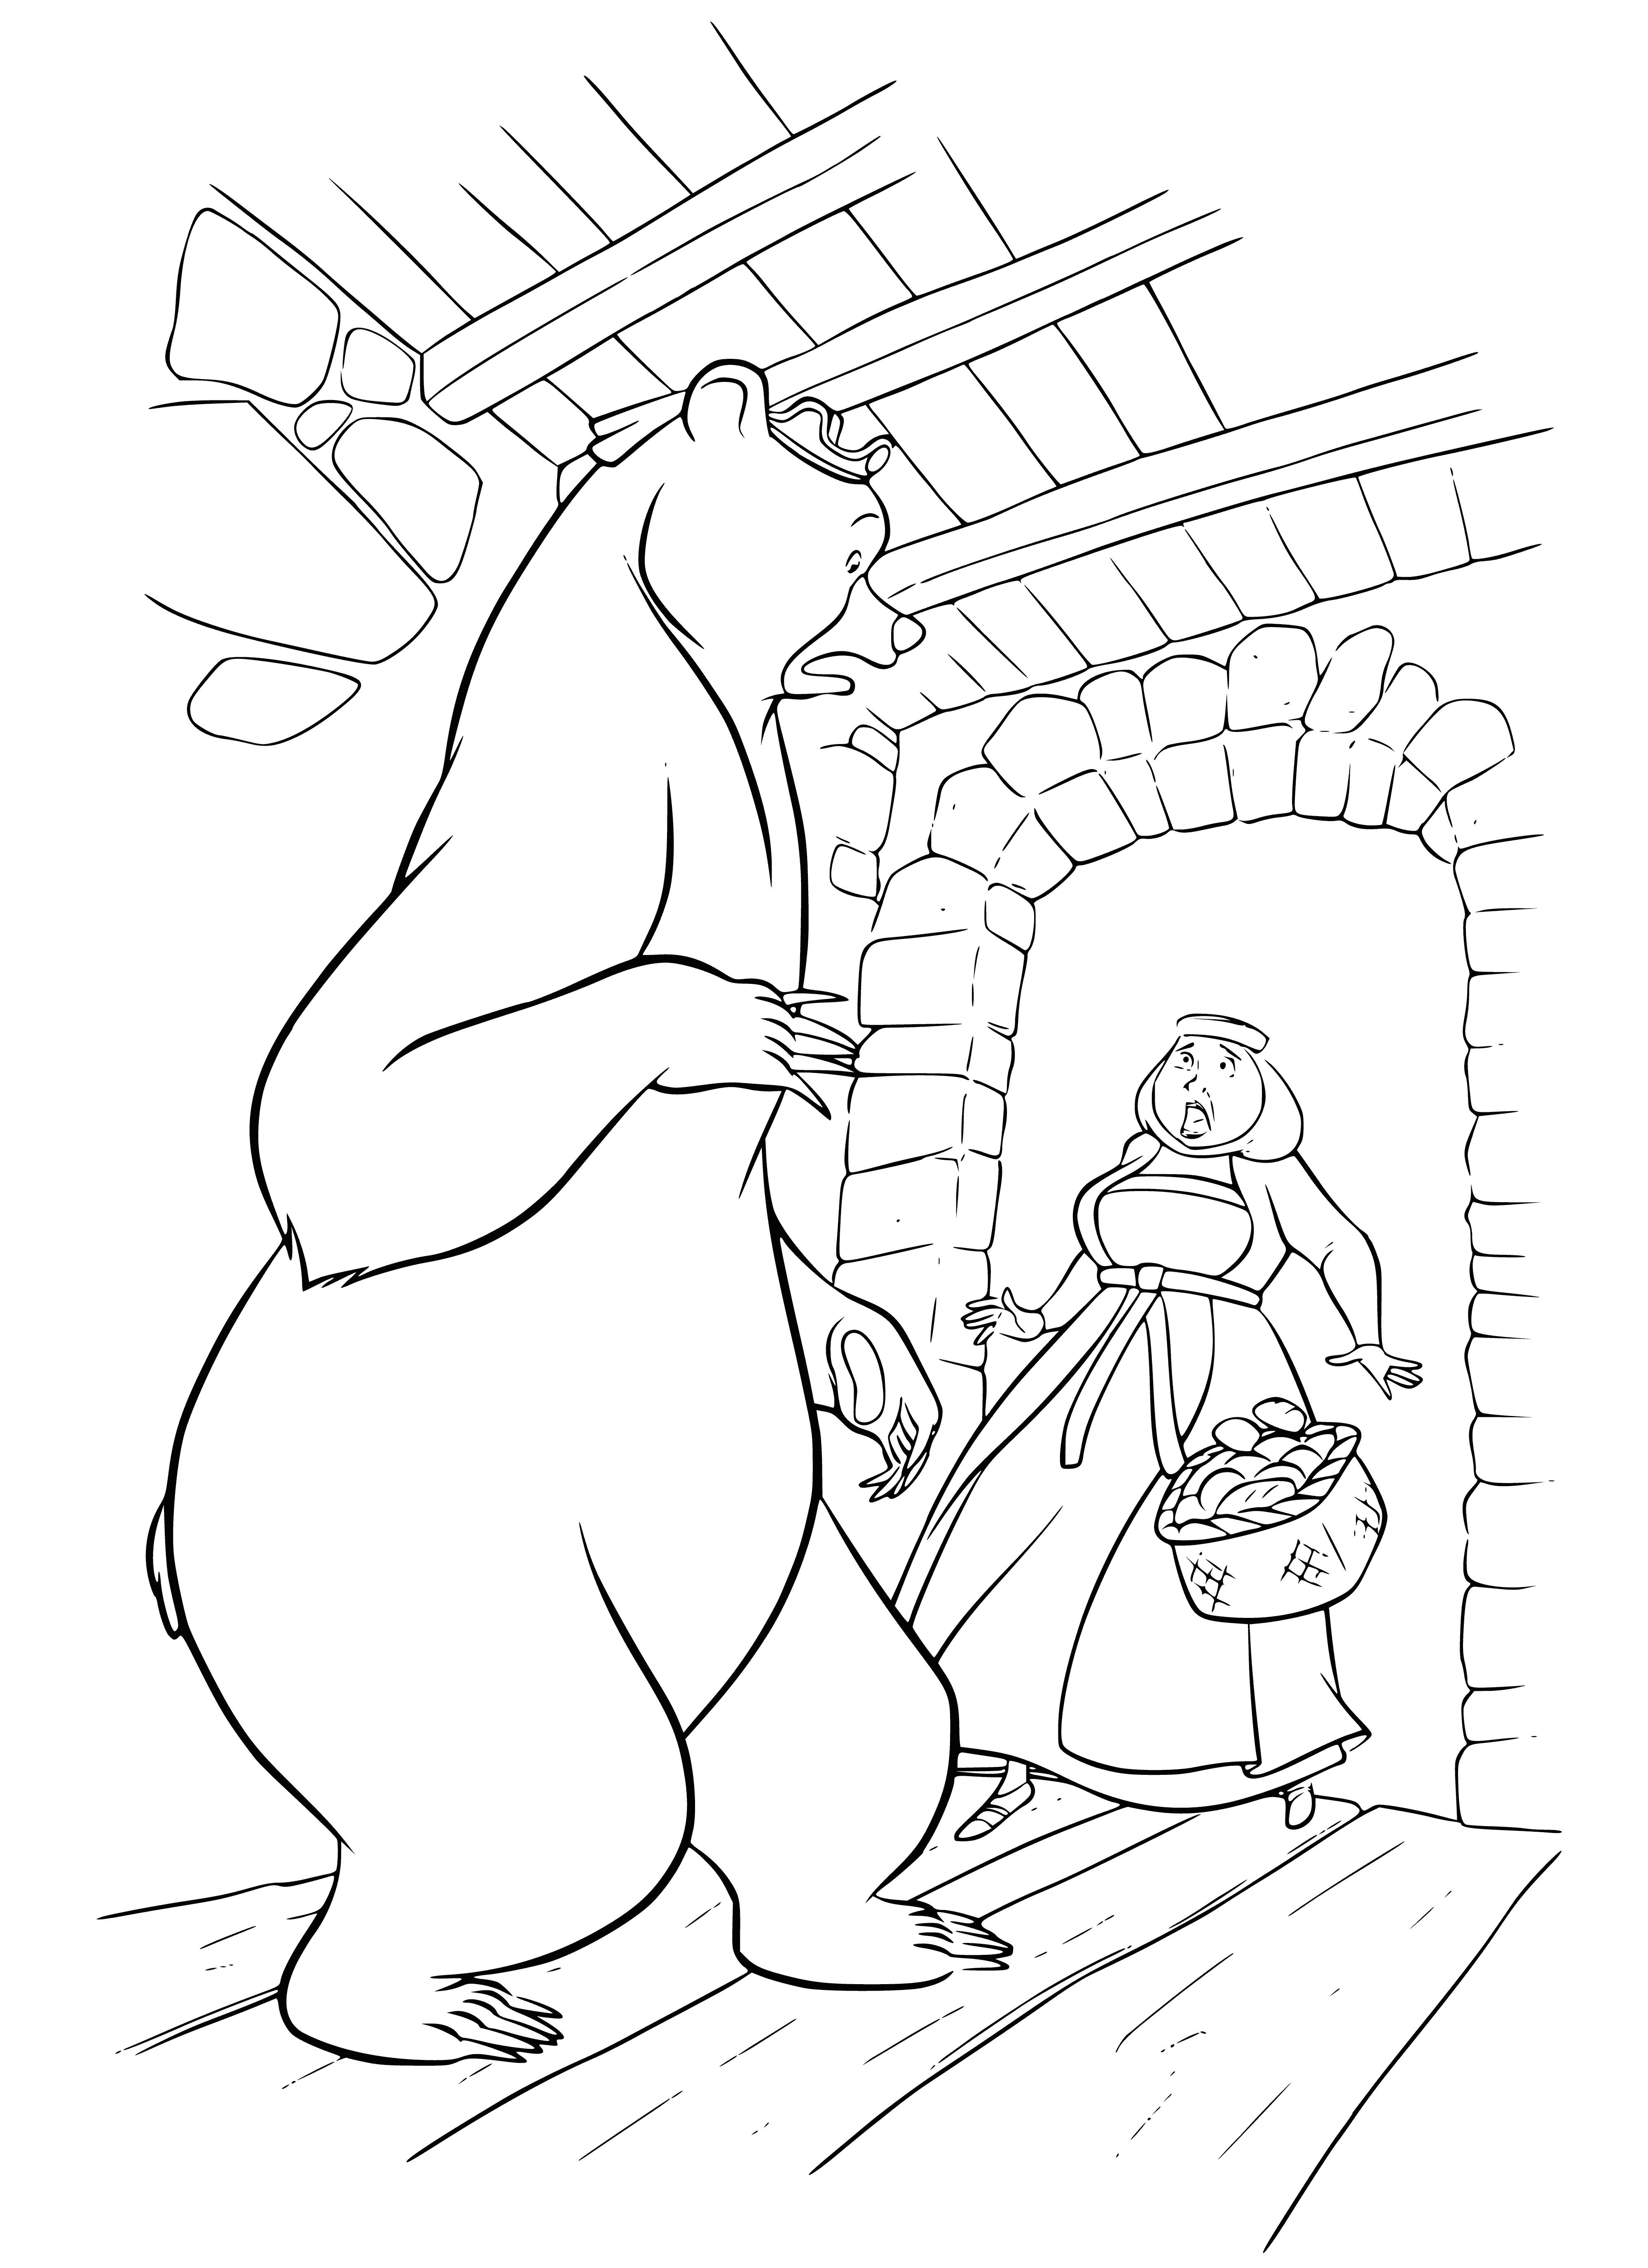 coloring page: A queen with a bear's head rests motionless, wearing regal clothing and a circlet. Her claws and fangs are bared, eyes closed. #fantasy